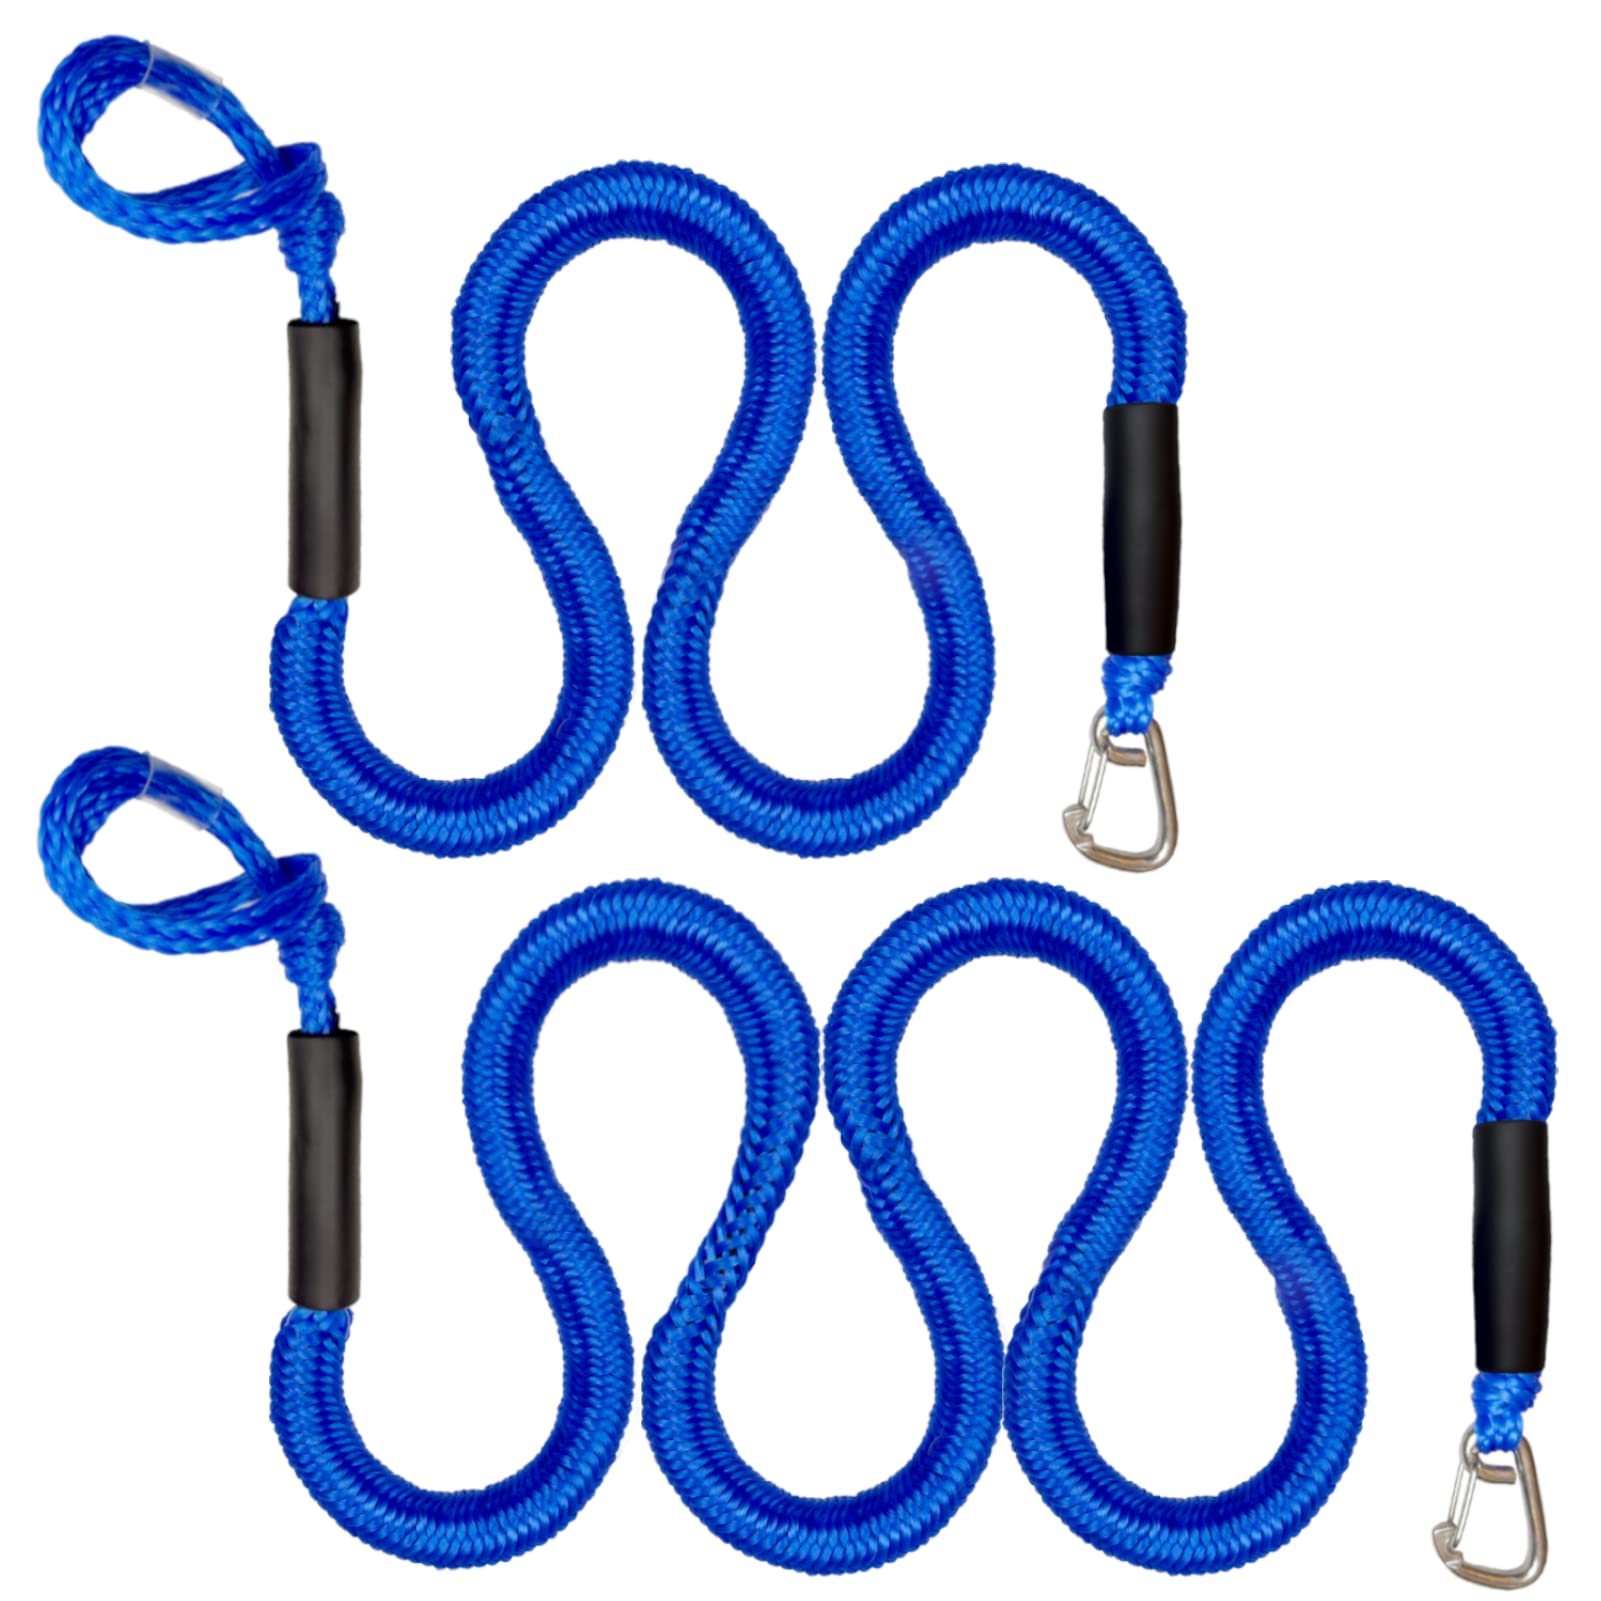 4FT+6FT Bungee Dock Line for Docking Anchor Line with Stainless Steel Clip  Accessories for Boats PWC, Kayak, Watercraft,SeaDoo,Jet Ski, Pontoon,  Canoe, Power Boat (Blue, 4FT&6FT) 4FT&6FT Blue